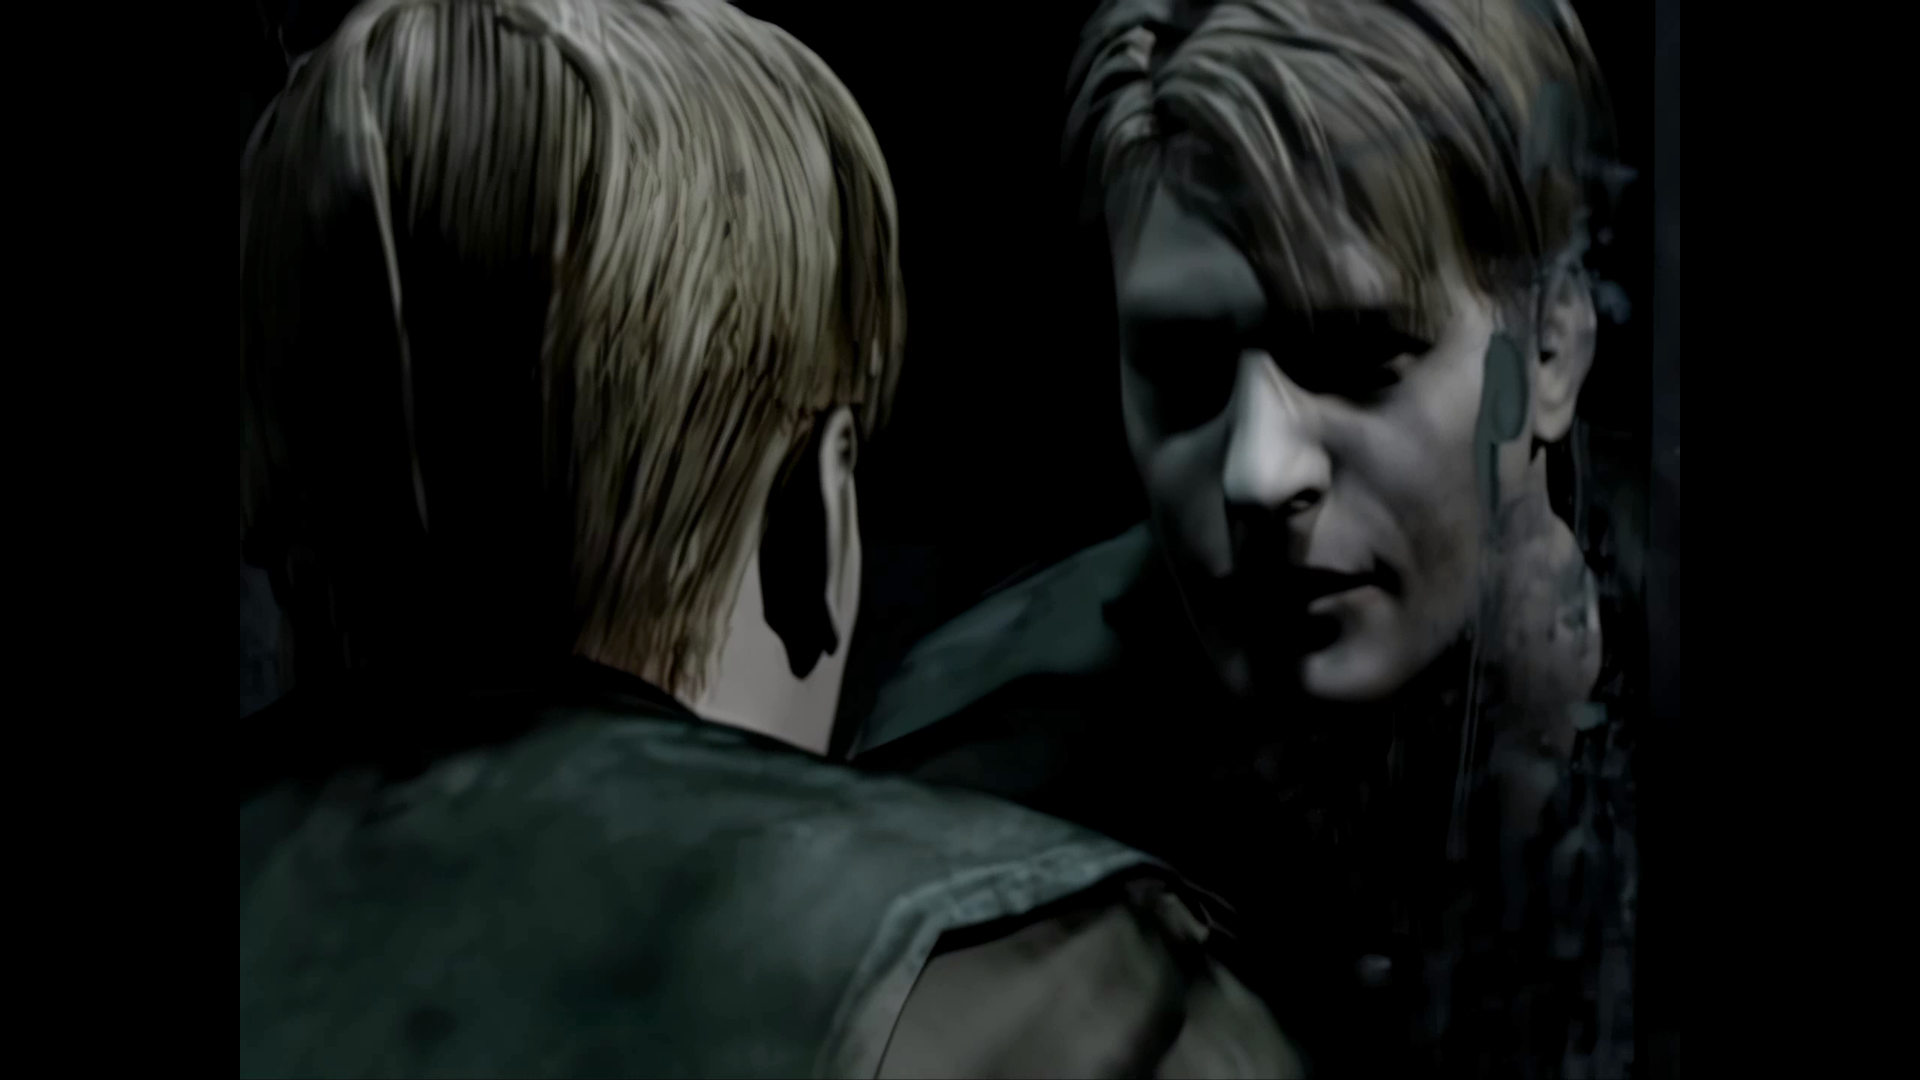 Silent Hill 2' Combines Horror and Mental Illness Well